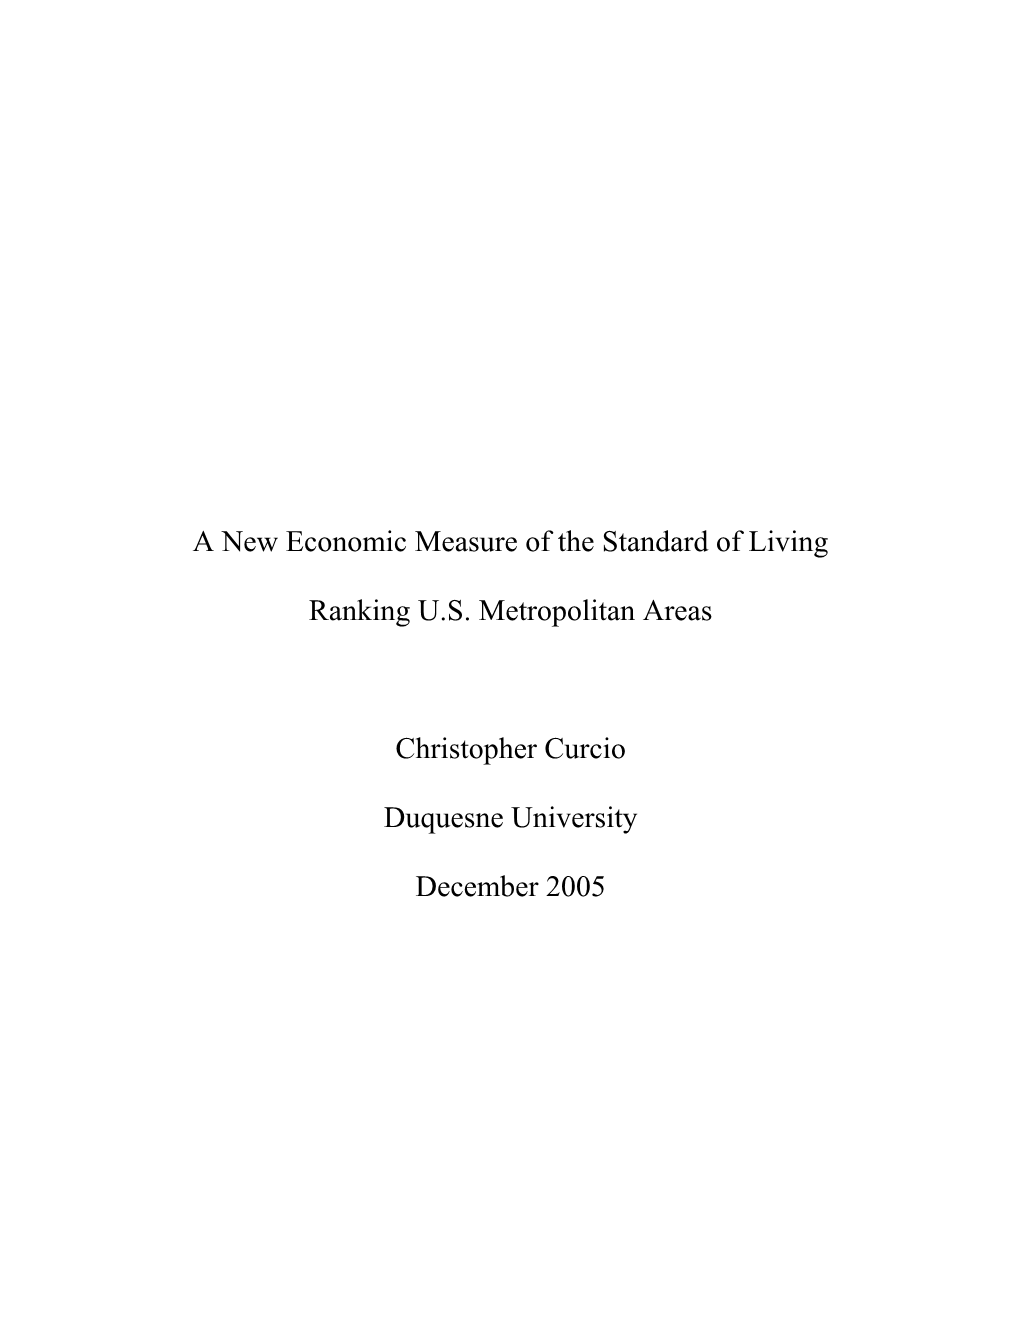 A New Economic Measure of Standard of Living